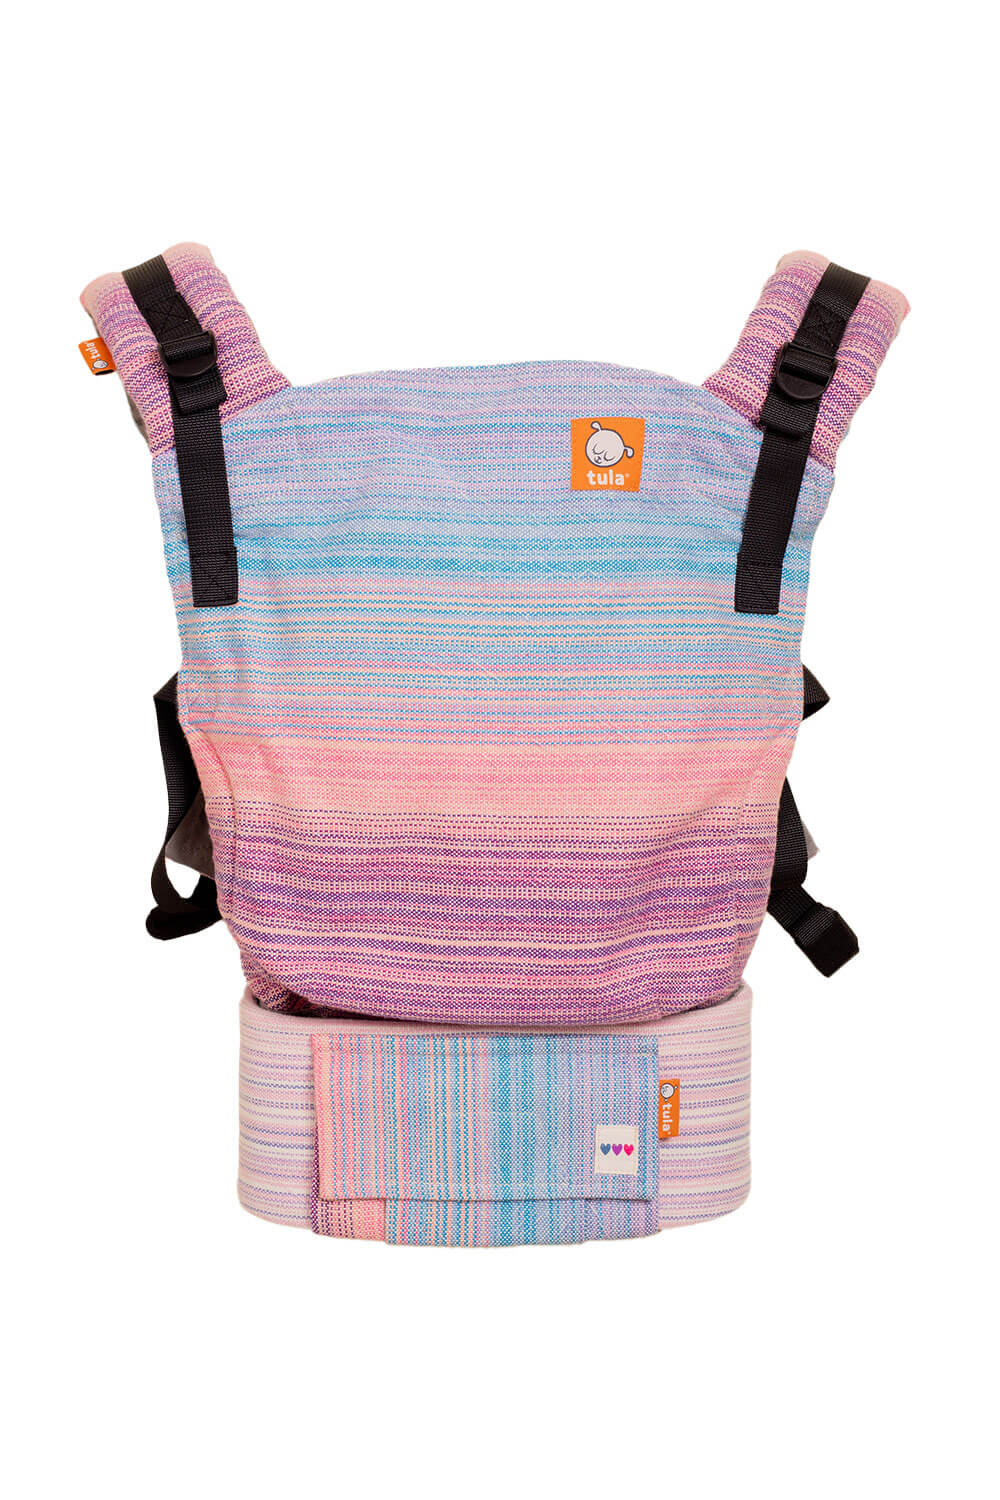 Ari - Signature Handwoven Free-to-Grow Baby Carrier